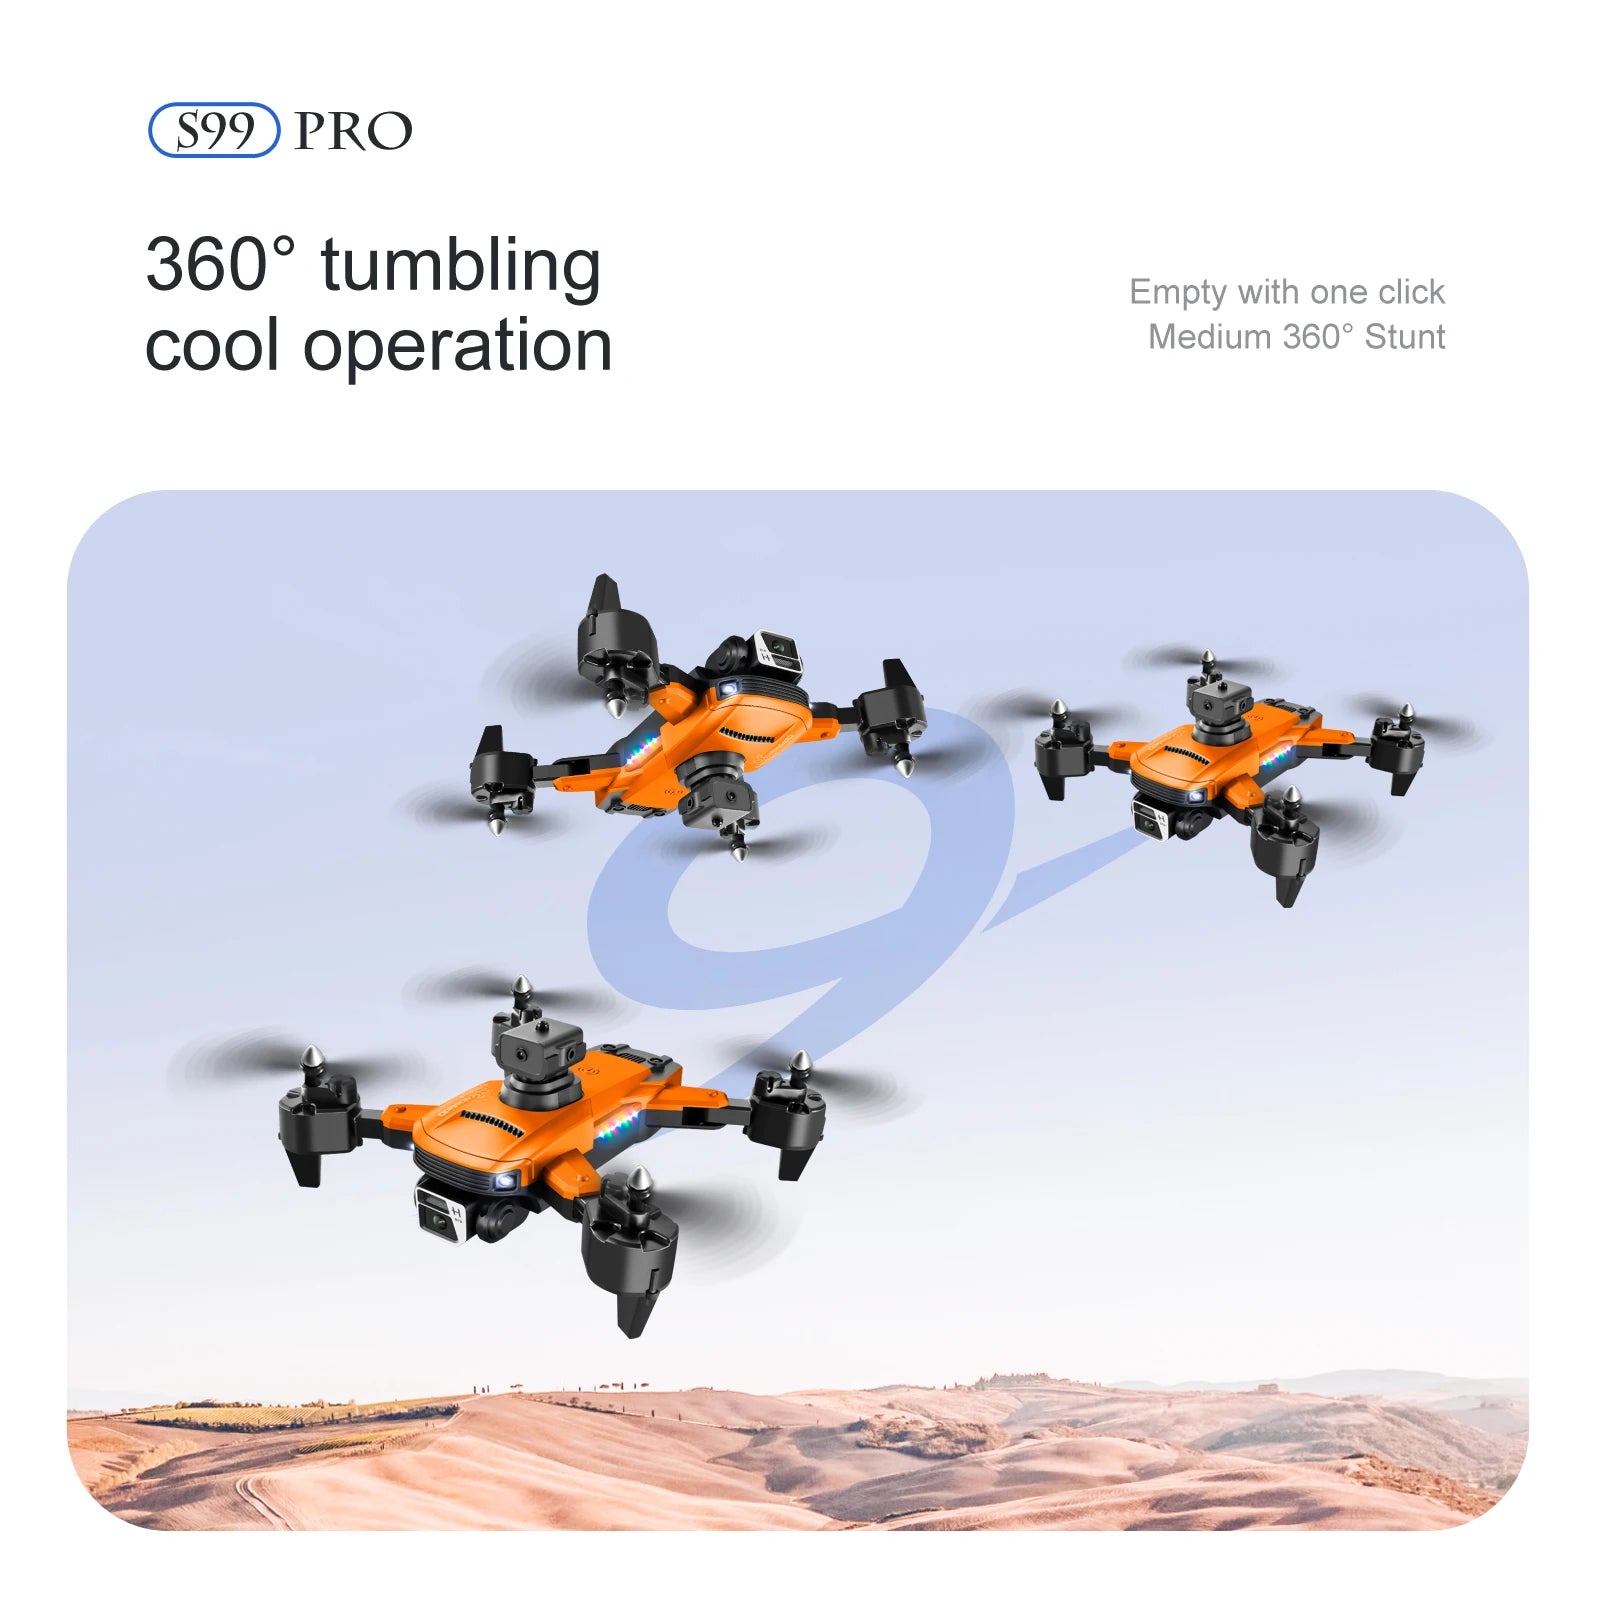 S99 Drone, s99 pro 360' tumbling empty with one click cool